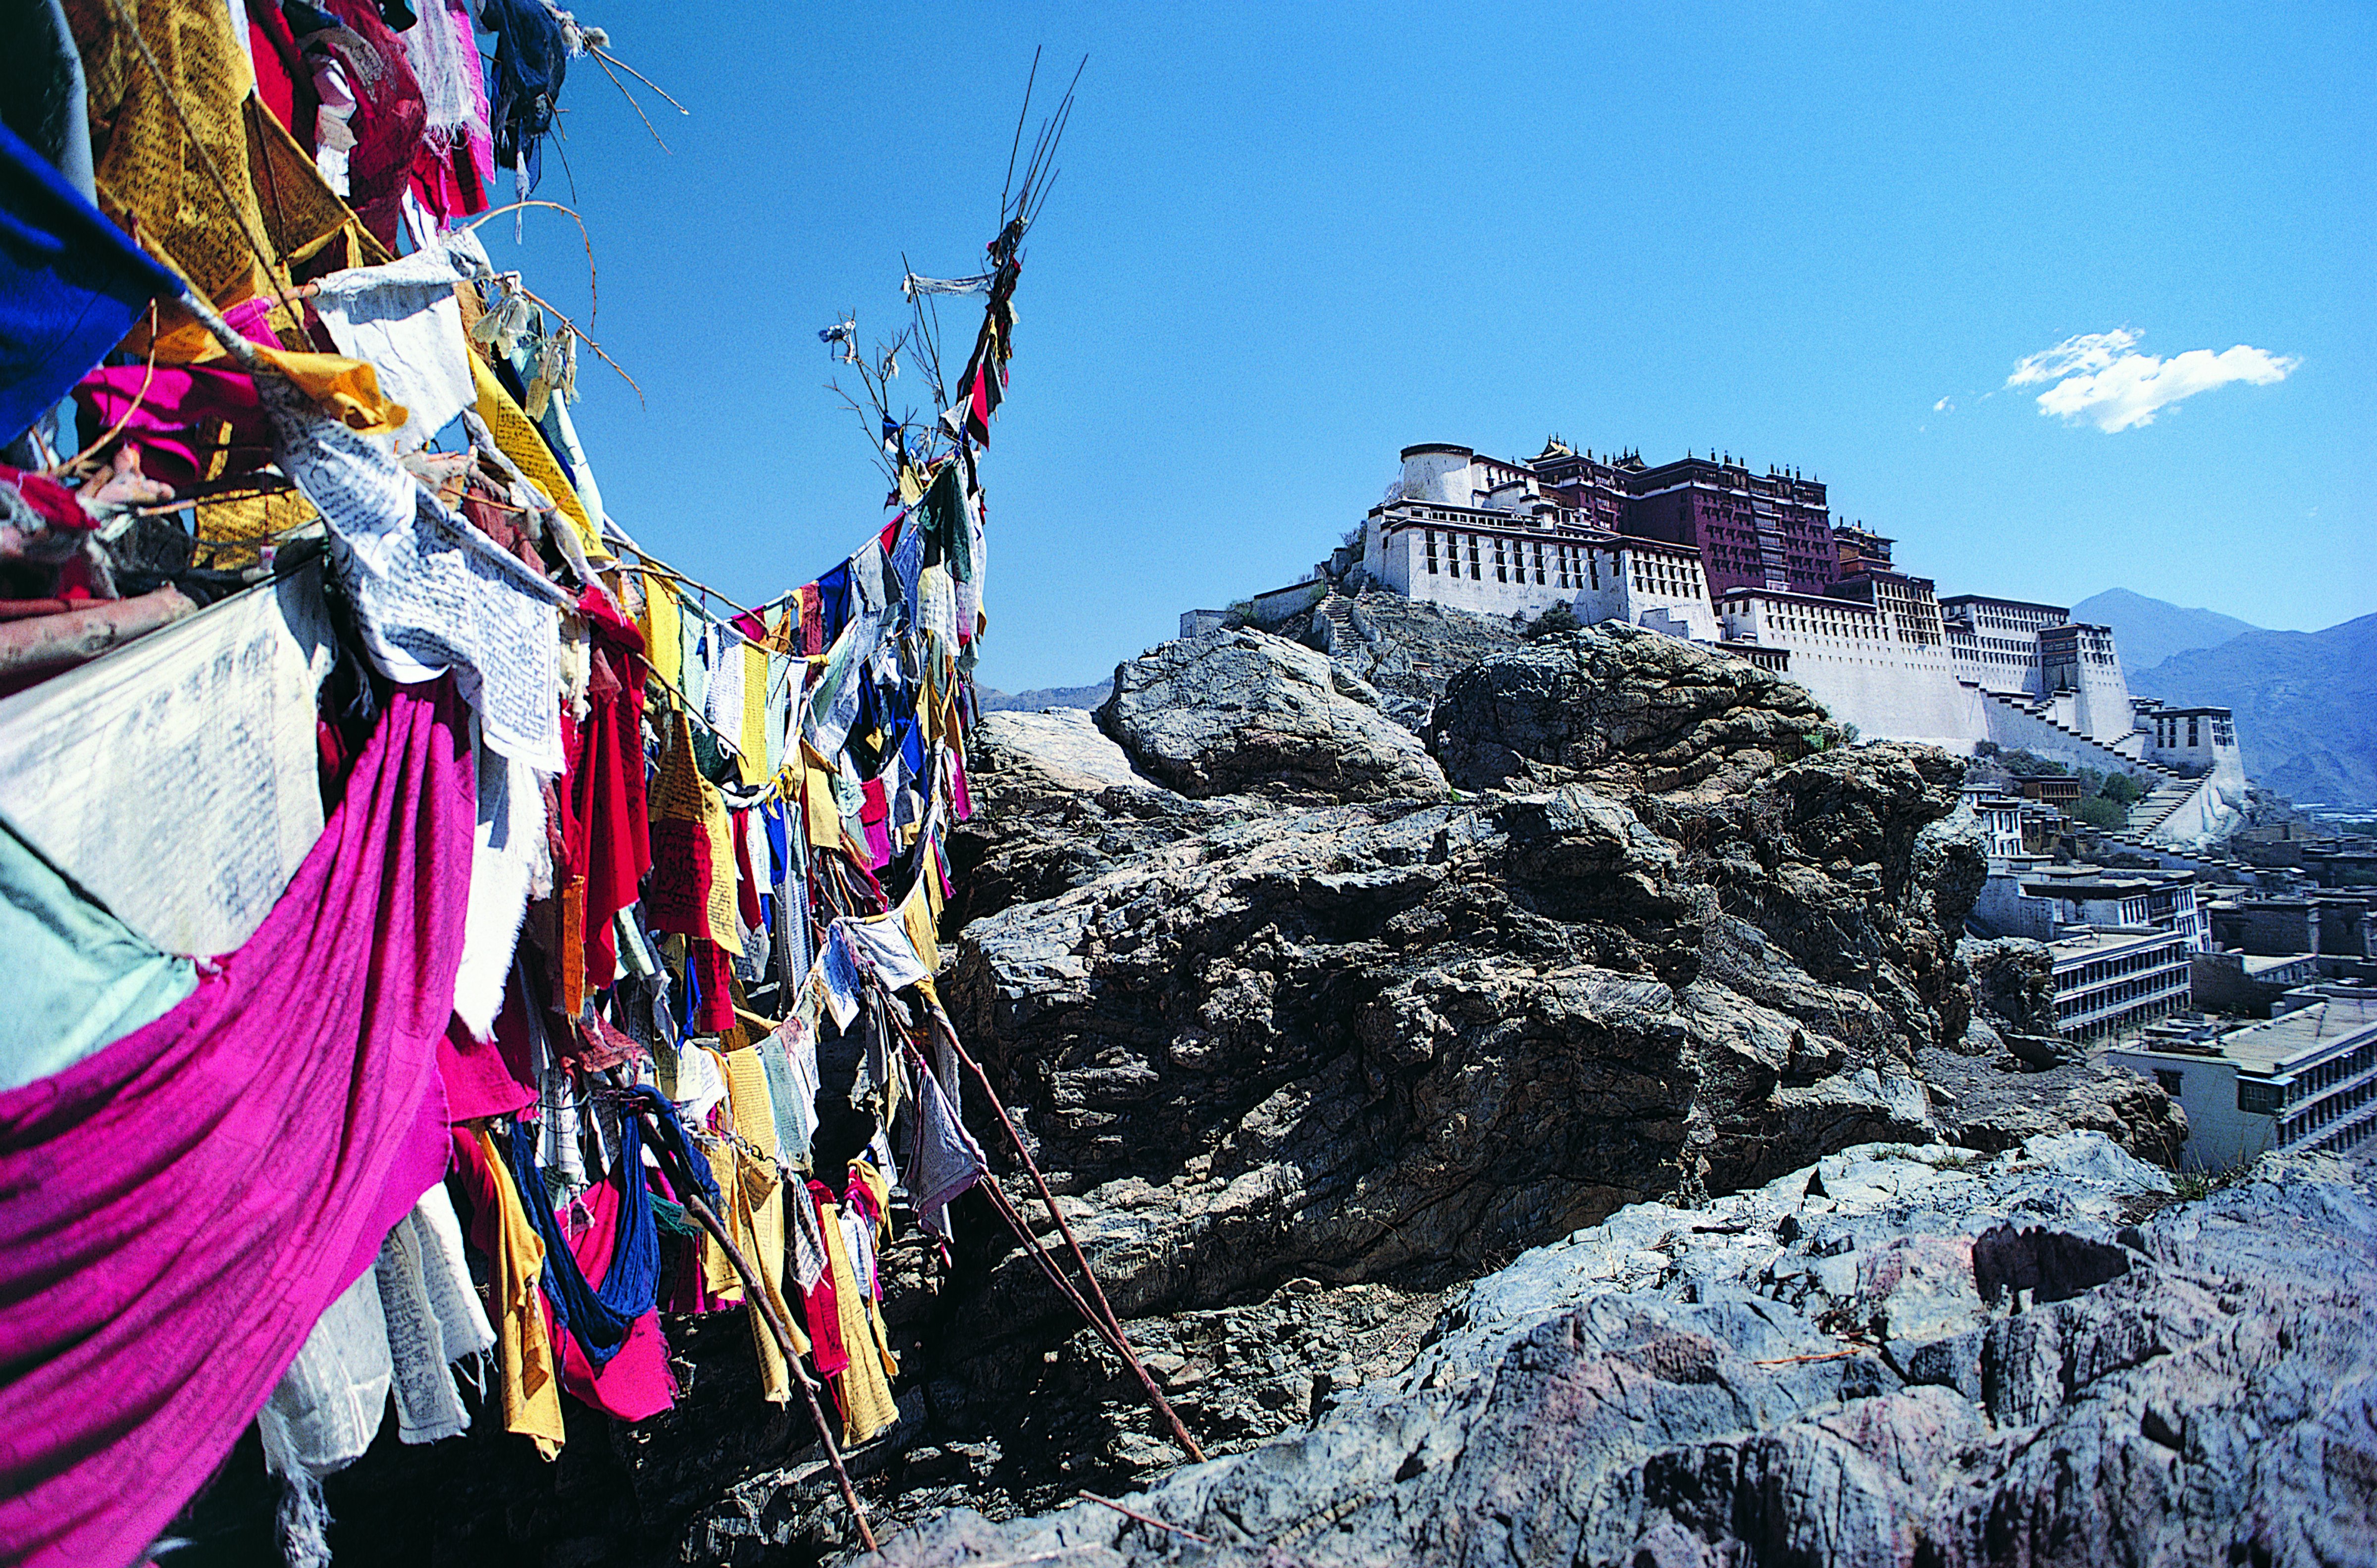 The Potala Palace in Lhasa, Tibet. (Dave Bartruff&mdash;Getty Images)